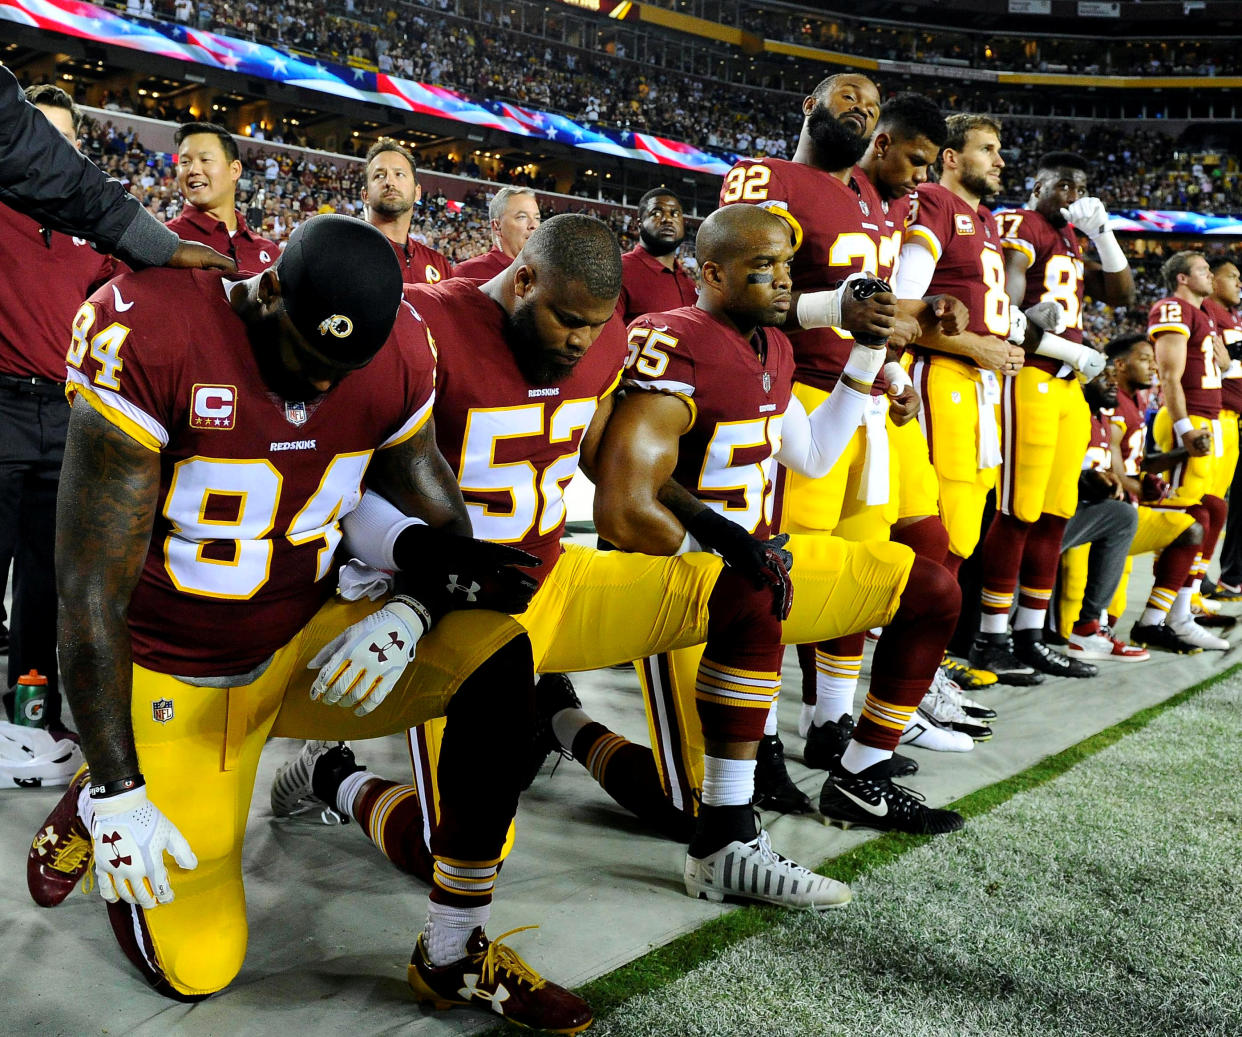 Washington Redskins players kneel or link arms during the national anthem before a game on Sept. 24, 2017. (Brad Mills-USA TODAY)